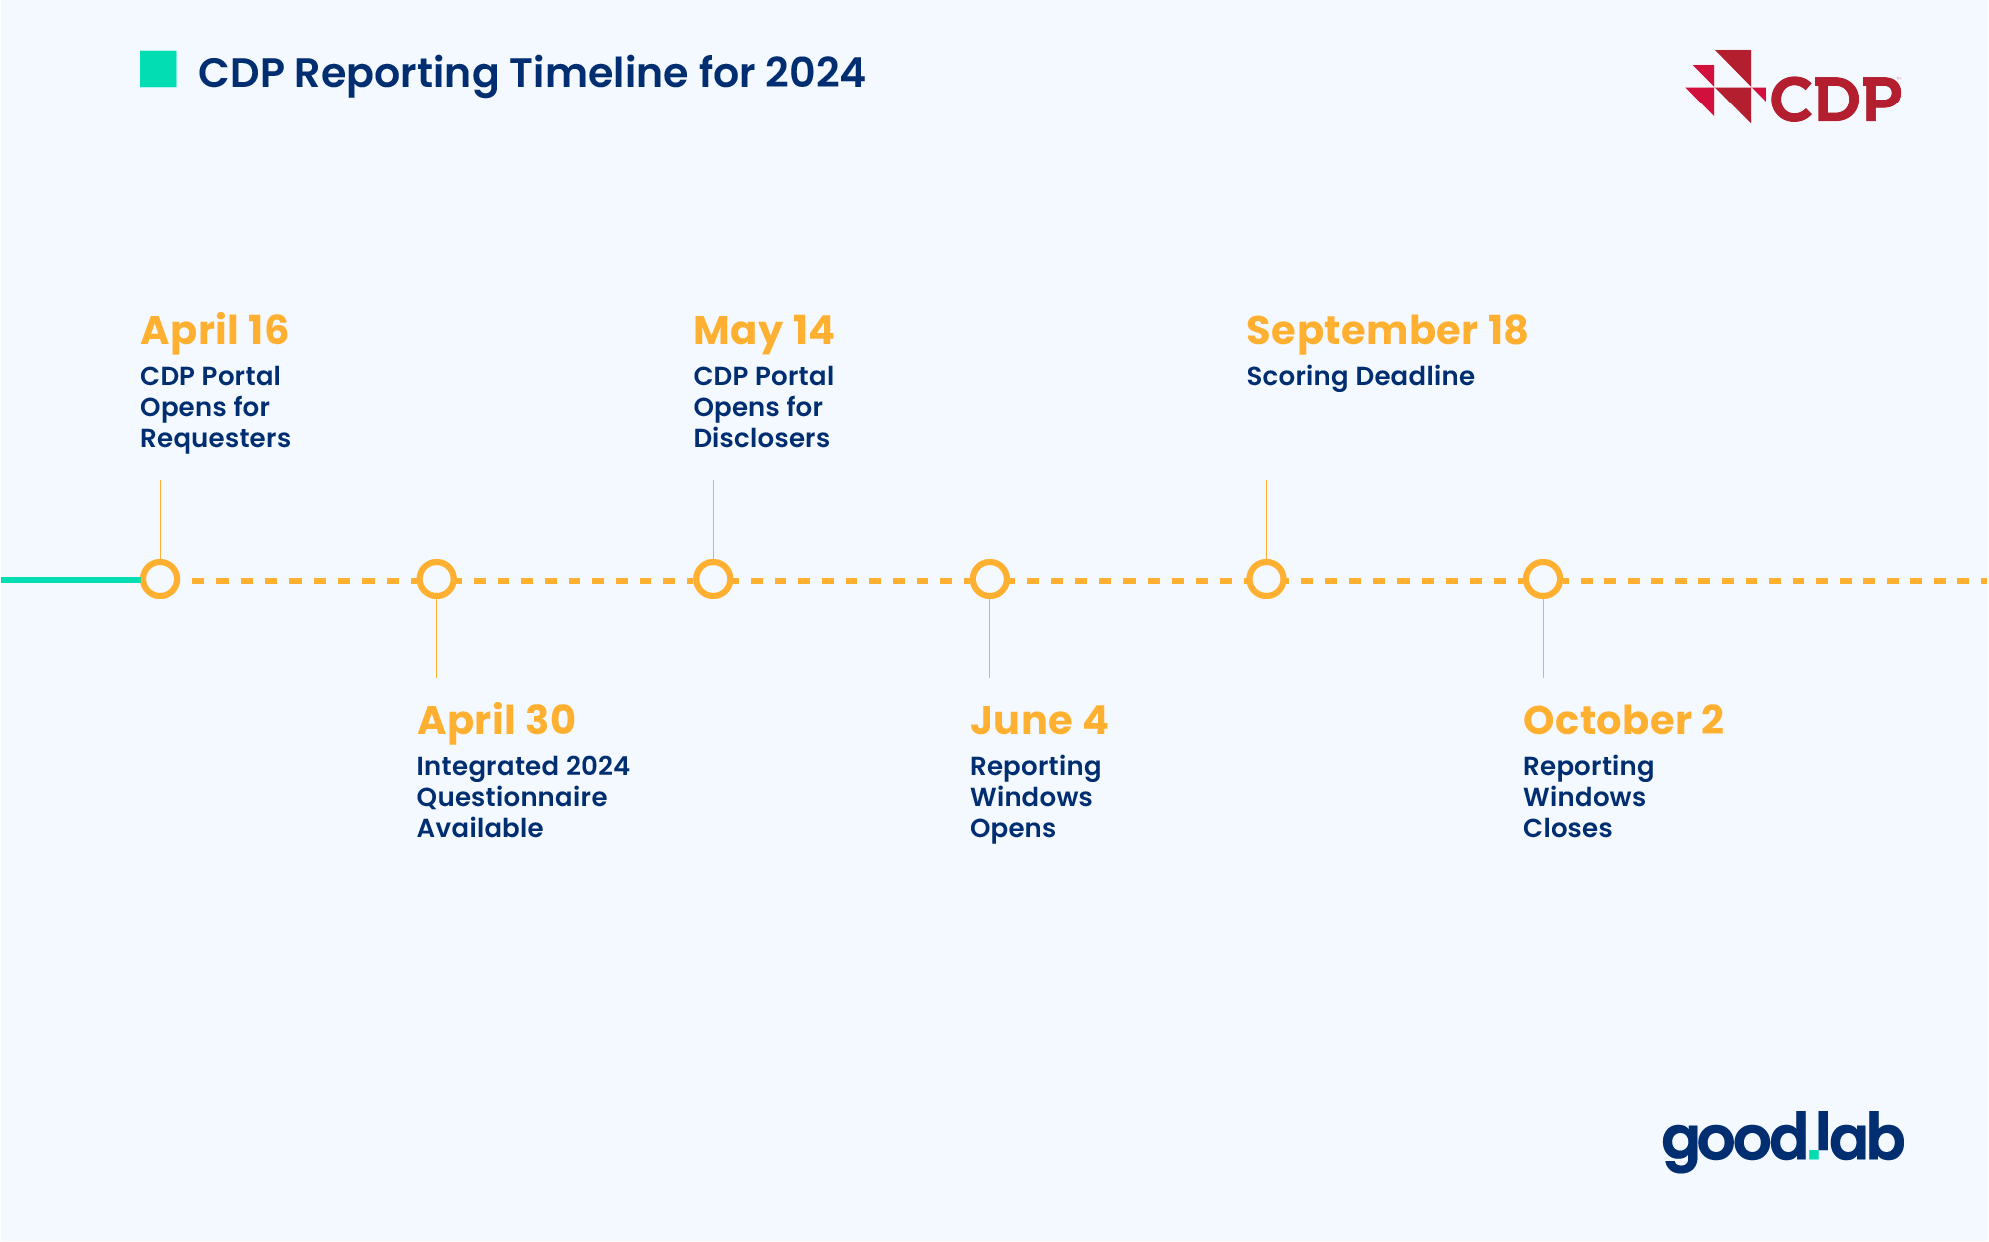 A Visual Time of CDP Reporting Timeline for 2024